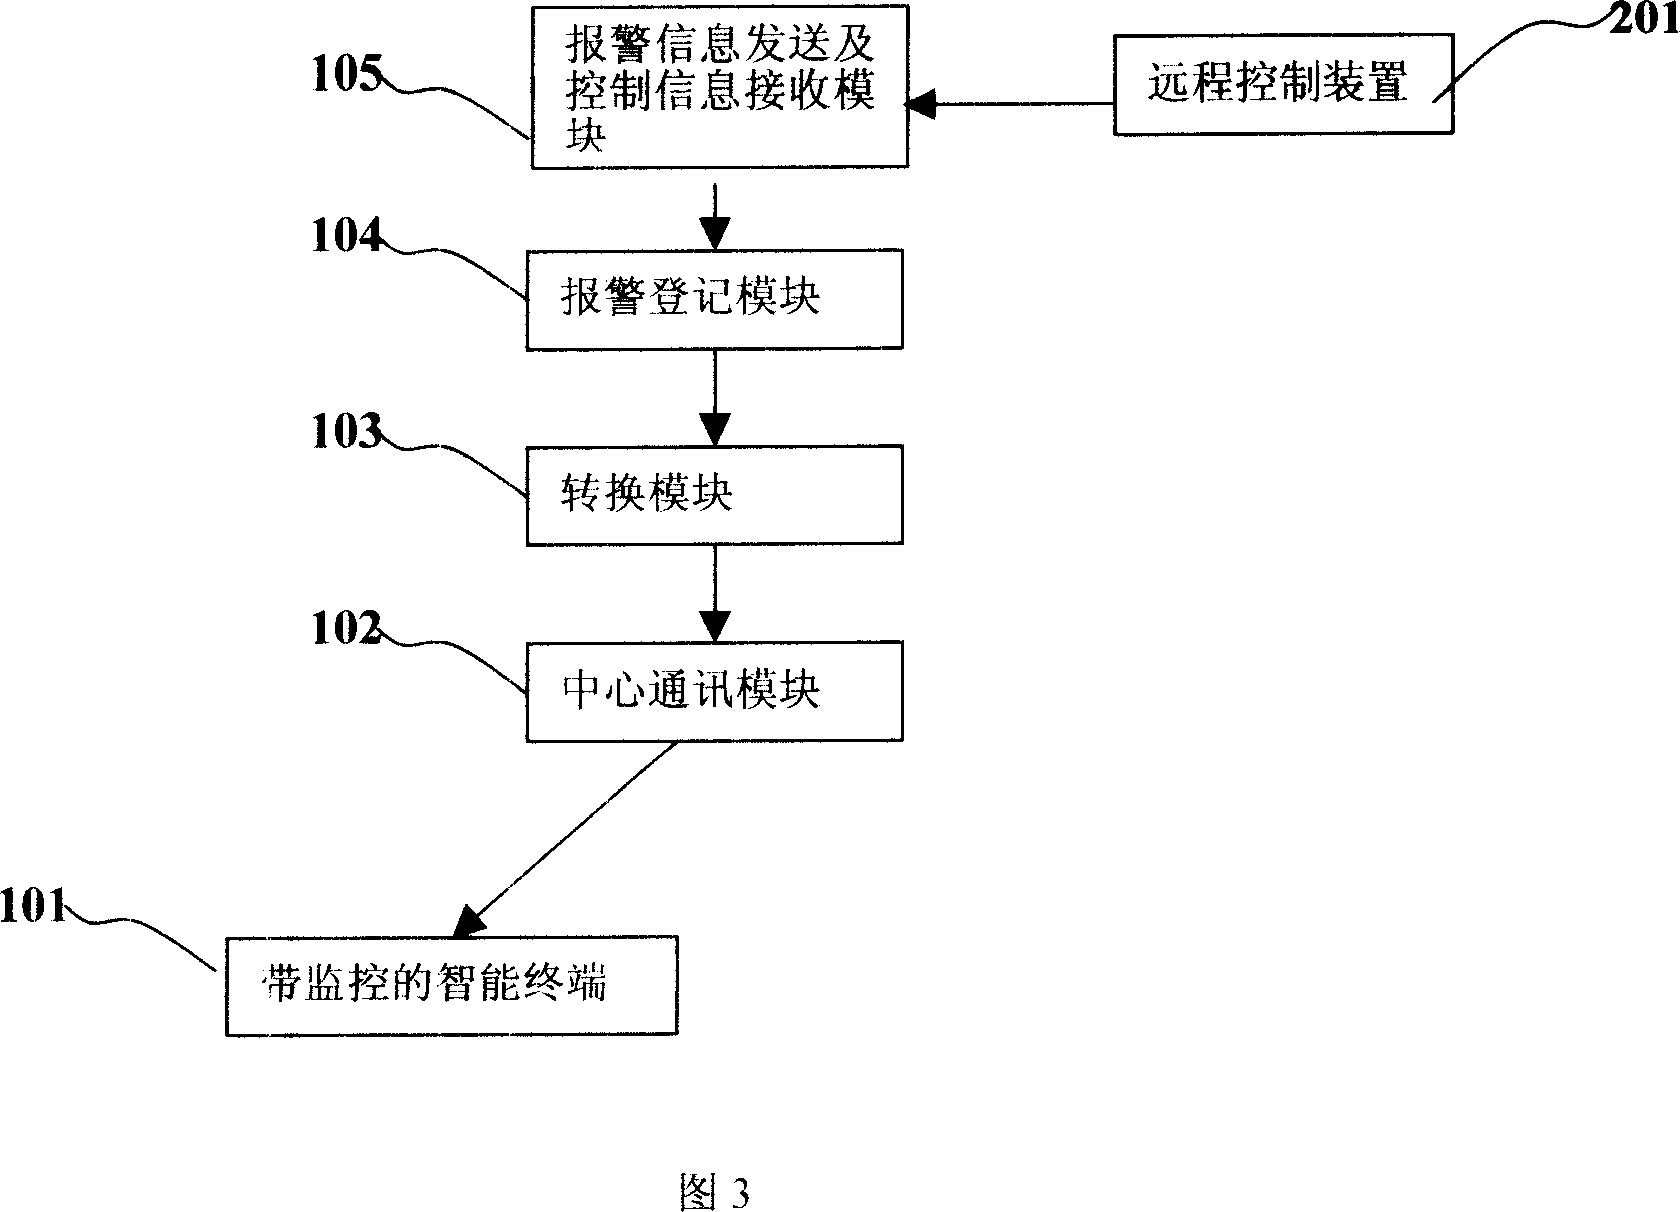 Method and system for remote monitoring and automatic alarm via networked intelligent device